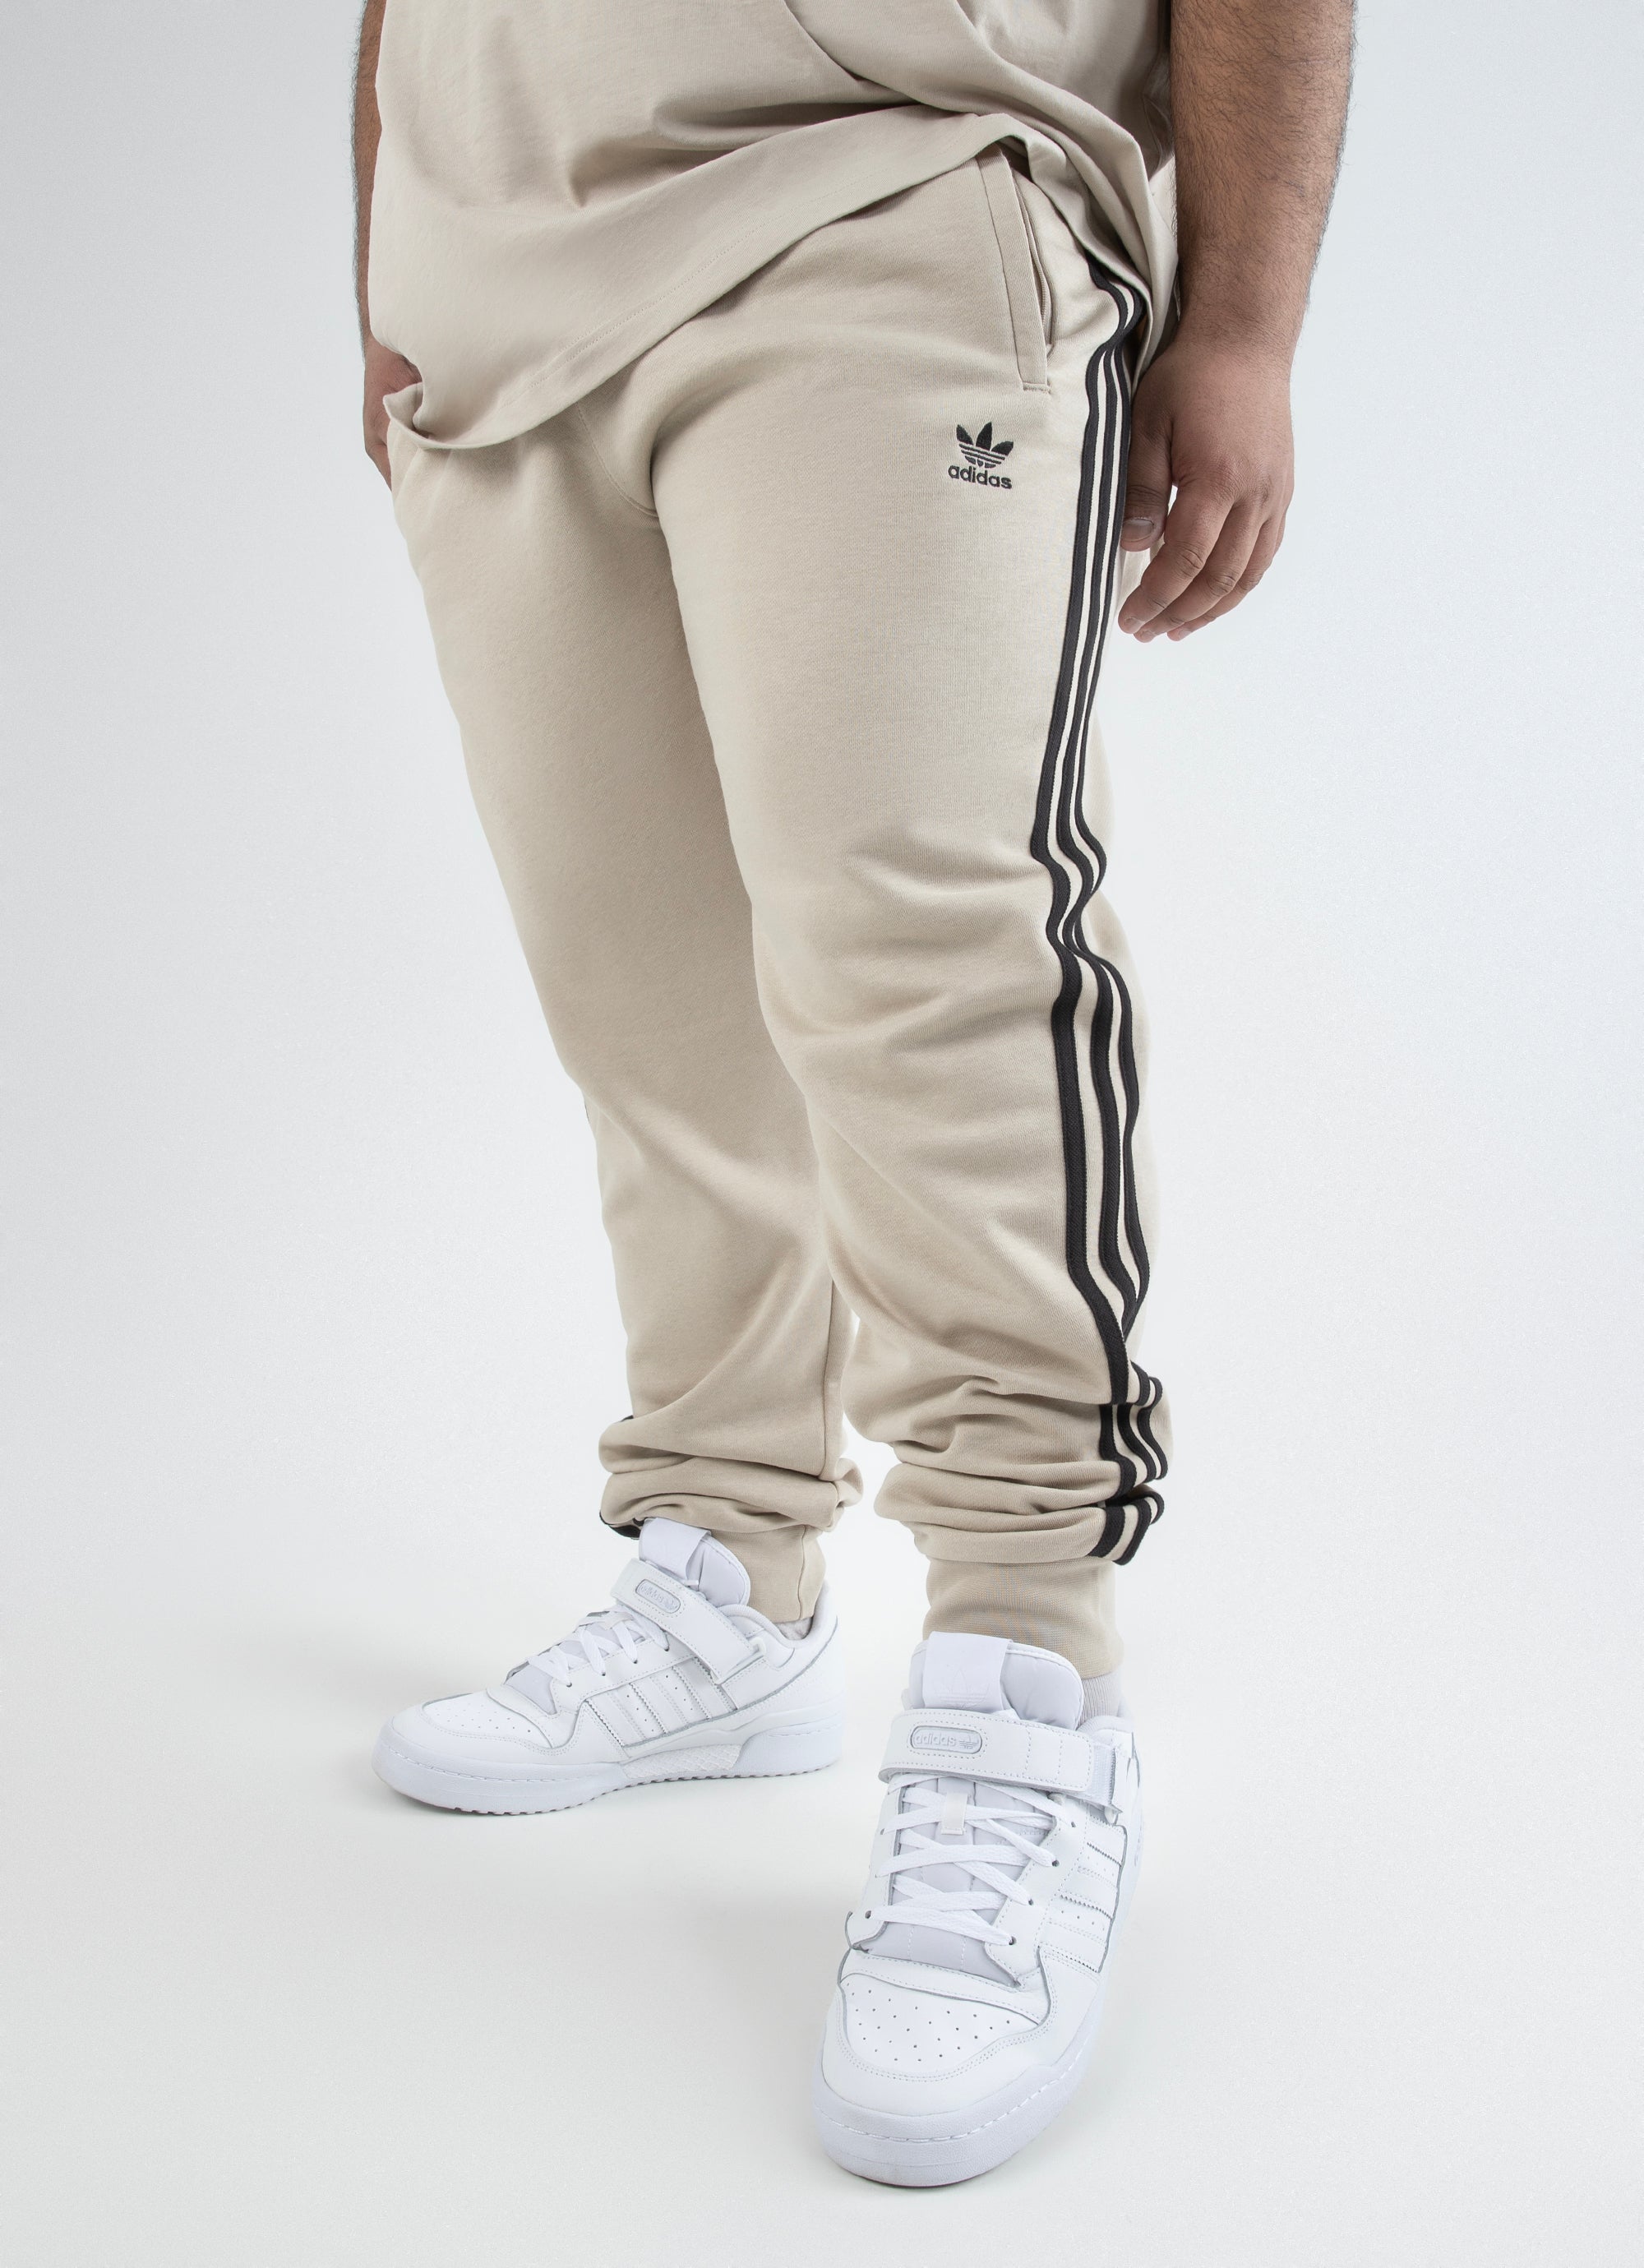 Future Icons 3-Stripes Pants by adidas Sportswear Online | THE ICONIC |  Australia